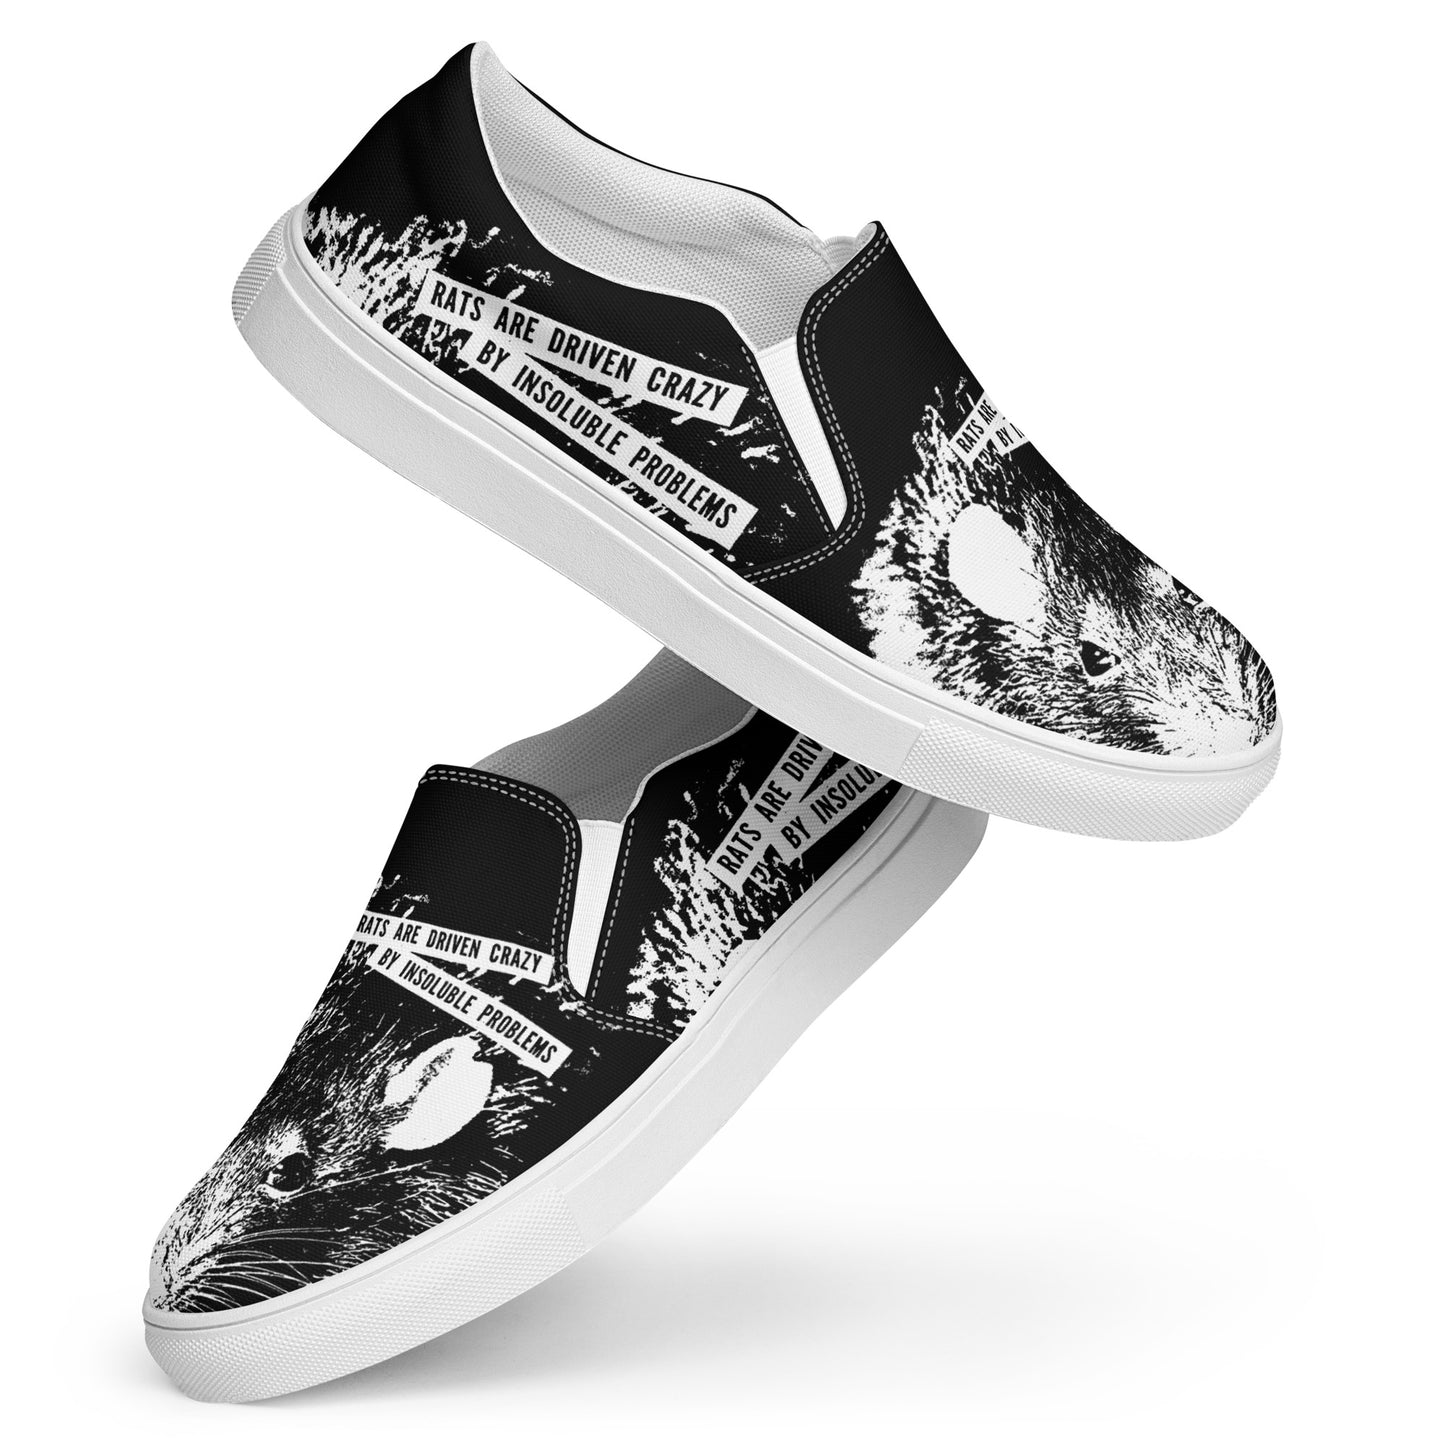 Winston Smith "Insoluble Problems" Men’s slip-on canvas shoes